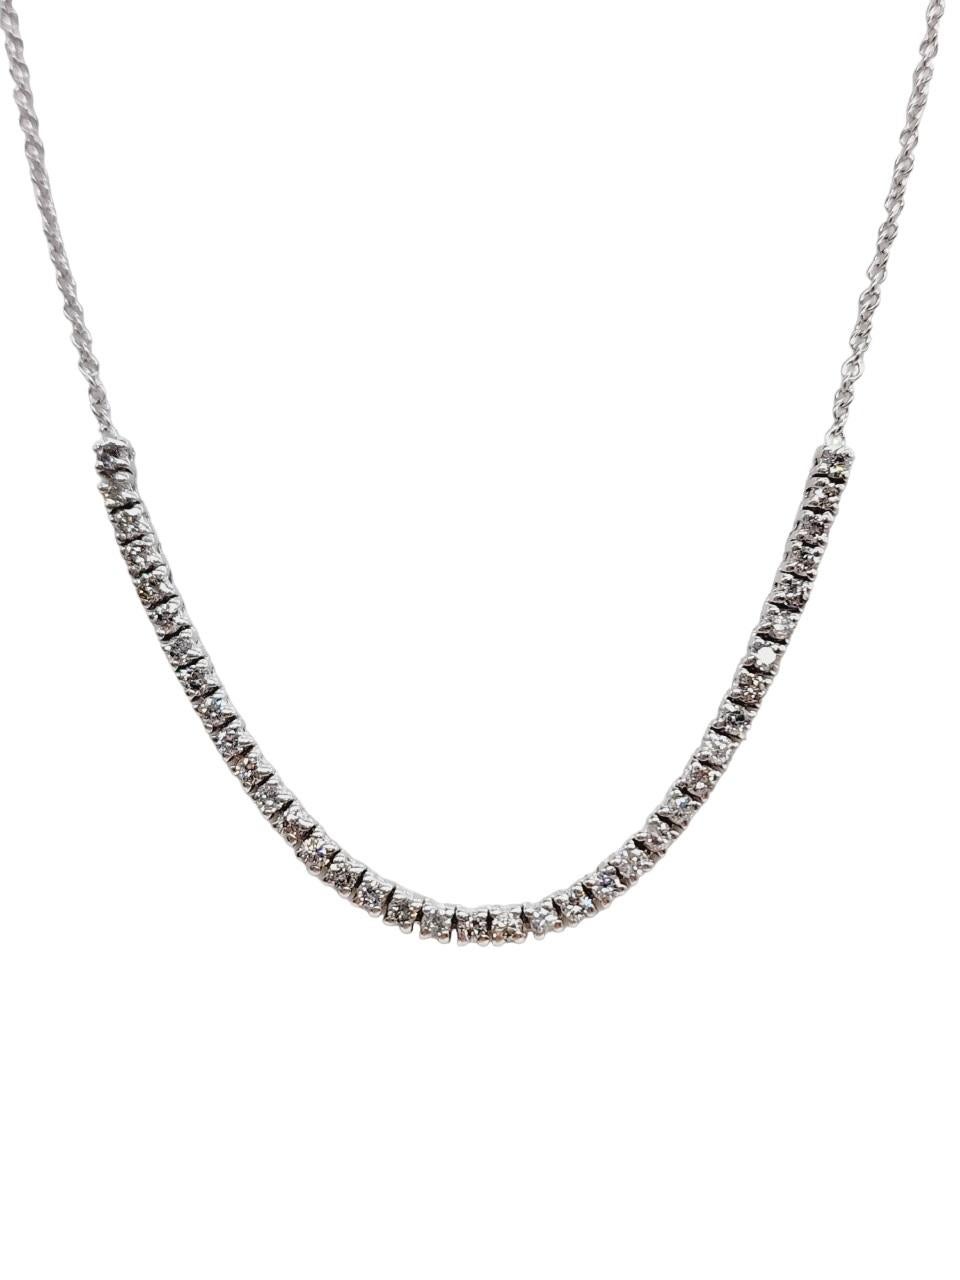 Brilliant and beautiful mini tennis necklace, natural round-brilliant cut white diamonds clean and Excellent shine.
14k white gold classic four-prong style for maximum light brilliance. 
24 inch length. Average H Color, SI Clarity. 